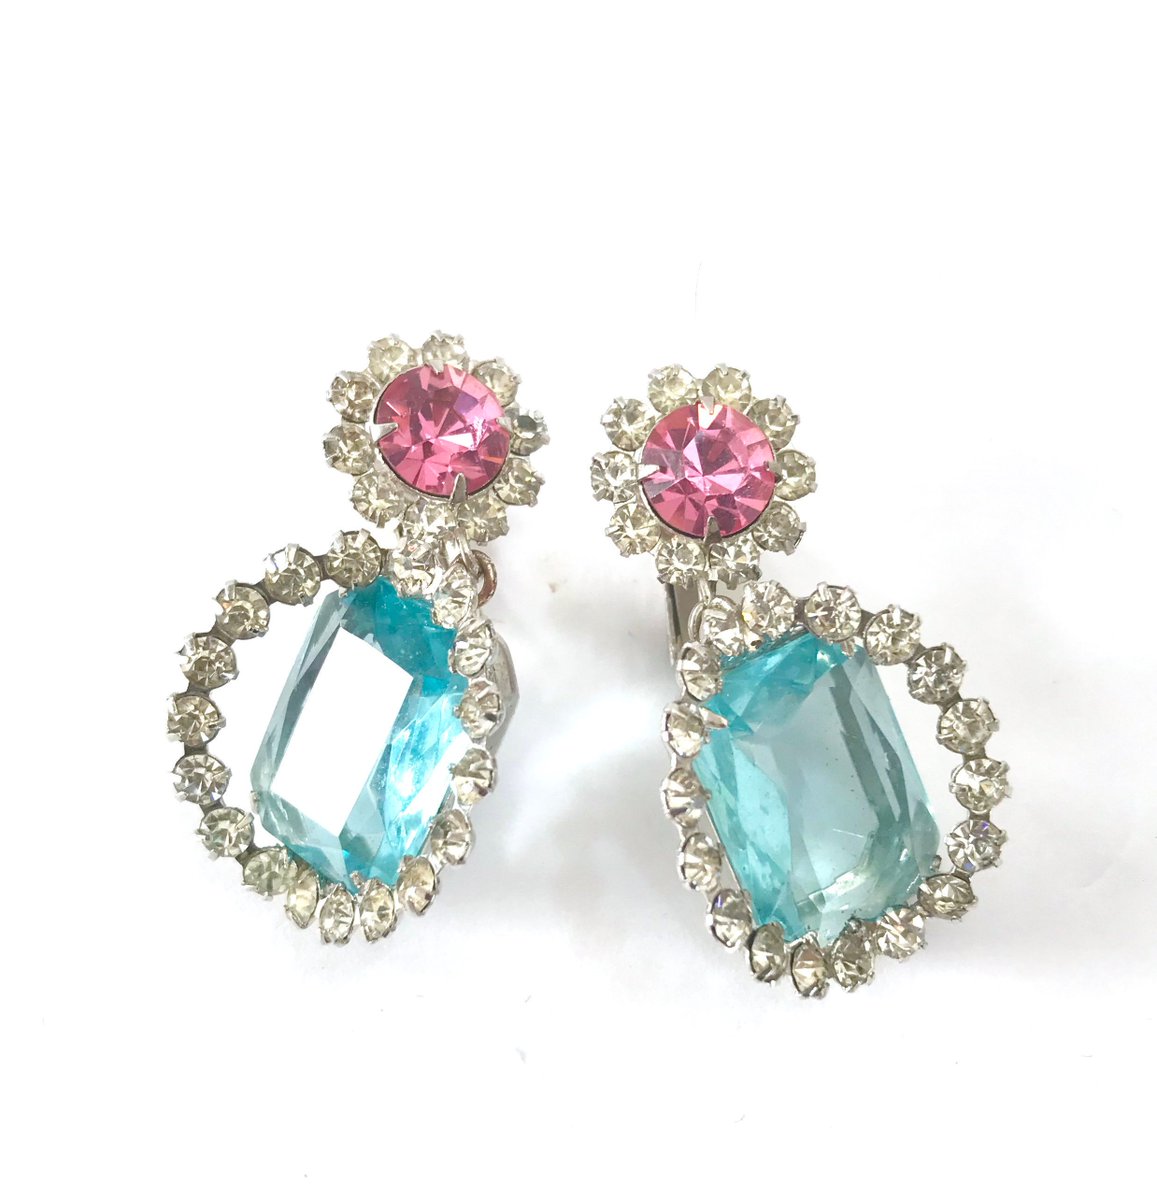 Just listed #etsy shop: Mimi di N Rhinestone Dangle Earrings Pink Blue and Clear Crystals Silver Tone Metal Unique Dimensional Design Wedding Gift for Her etsy.me/2G8bEoJ #signedMimidiN #rhinestonedangle #gorgeousearrings #weddingspecialoccasion #plsfollow